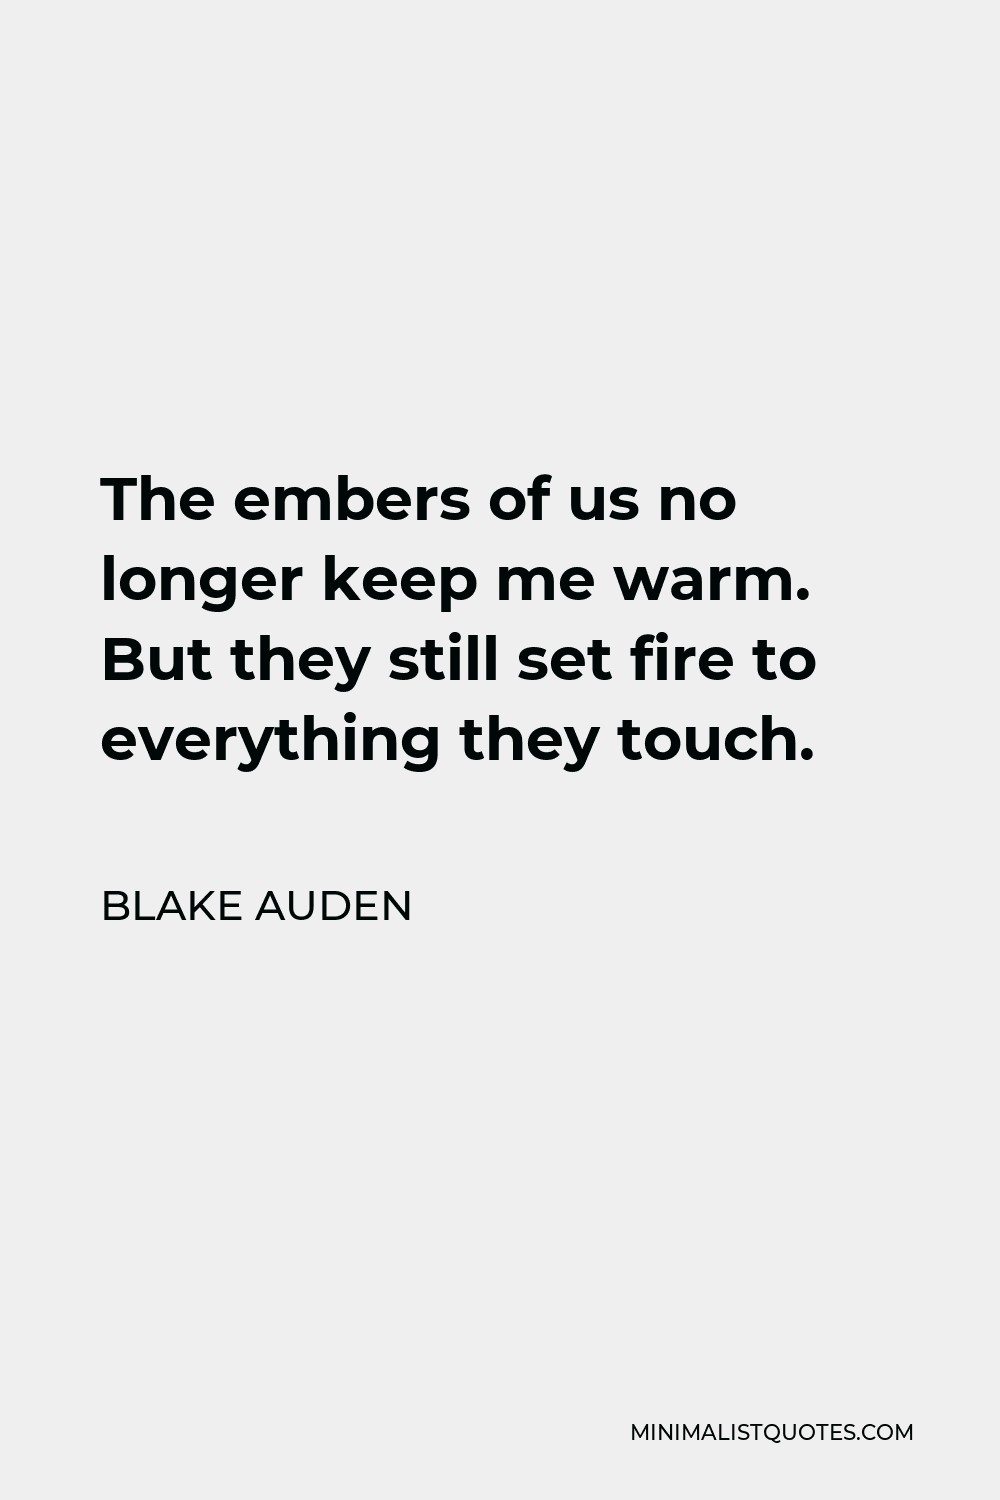 Blake Auden Quote - The embers of us no longer keep me warm. But they still set fire to everything they touch.